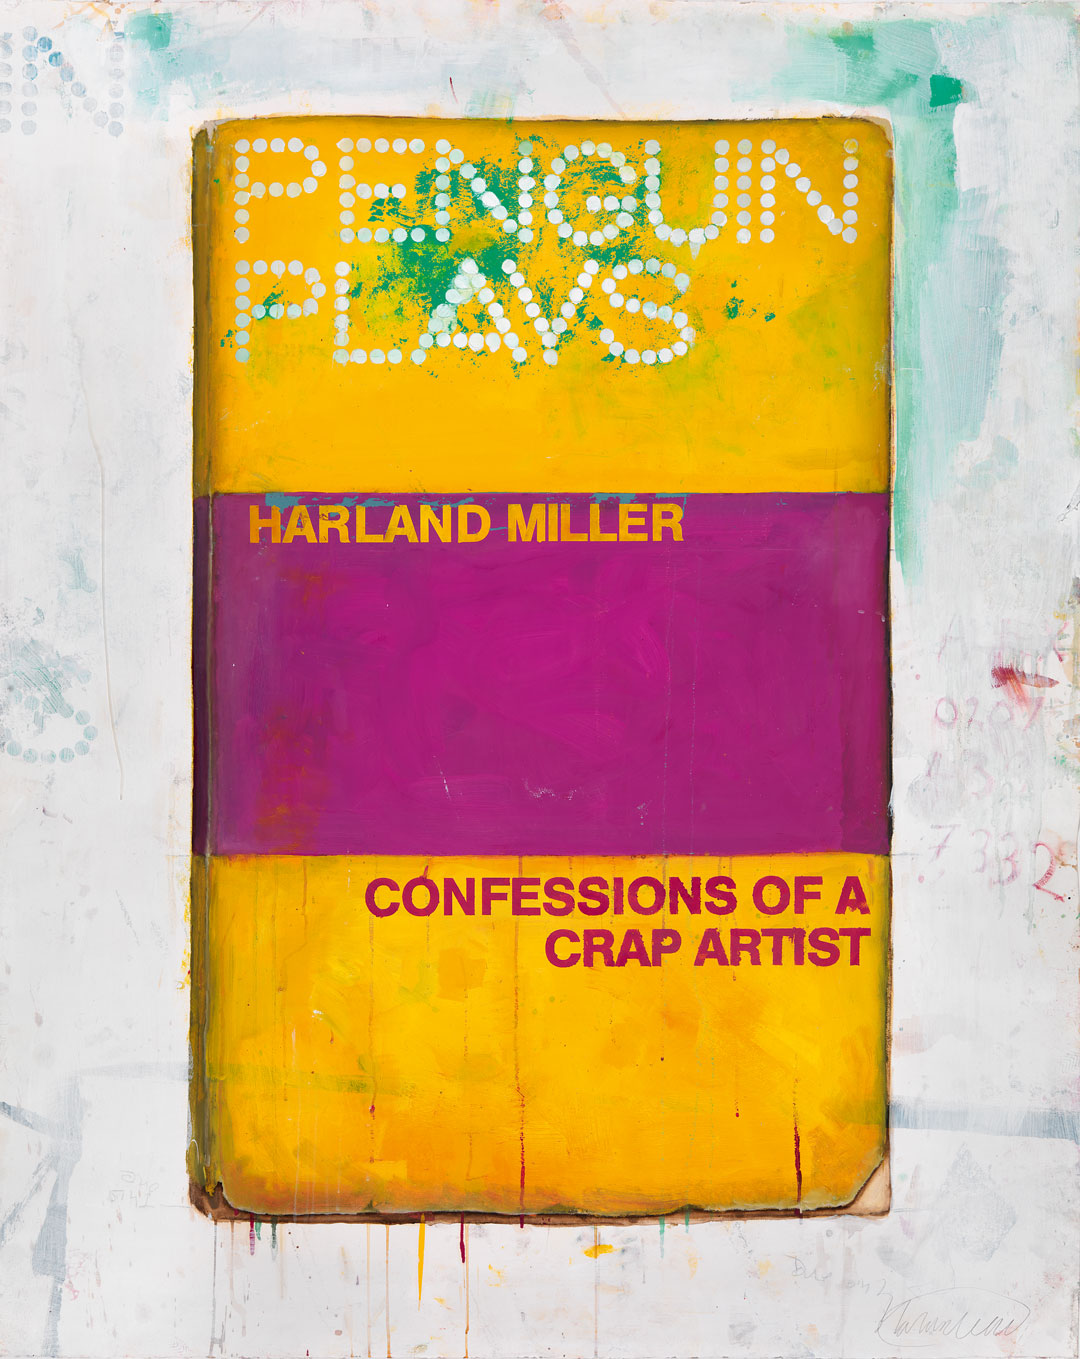 Confessions of a Crap Artist (2013) by Harland Miller. As featured in Reading Art
